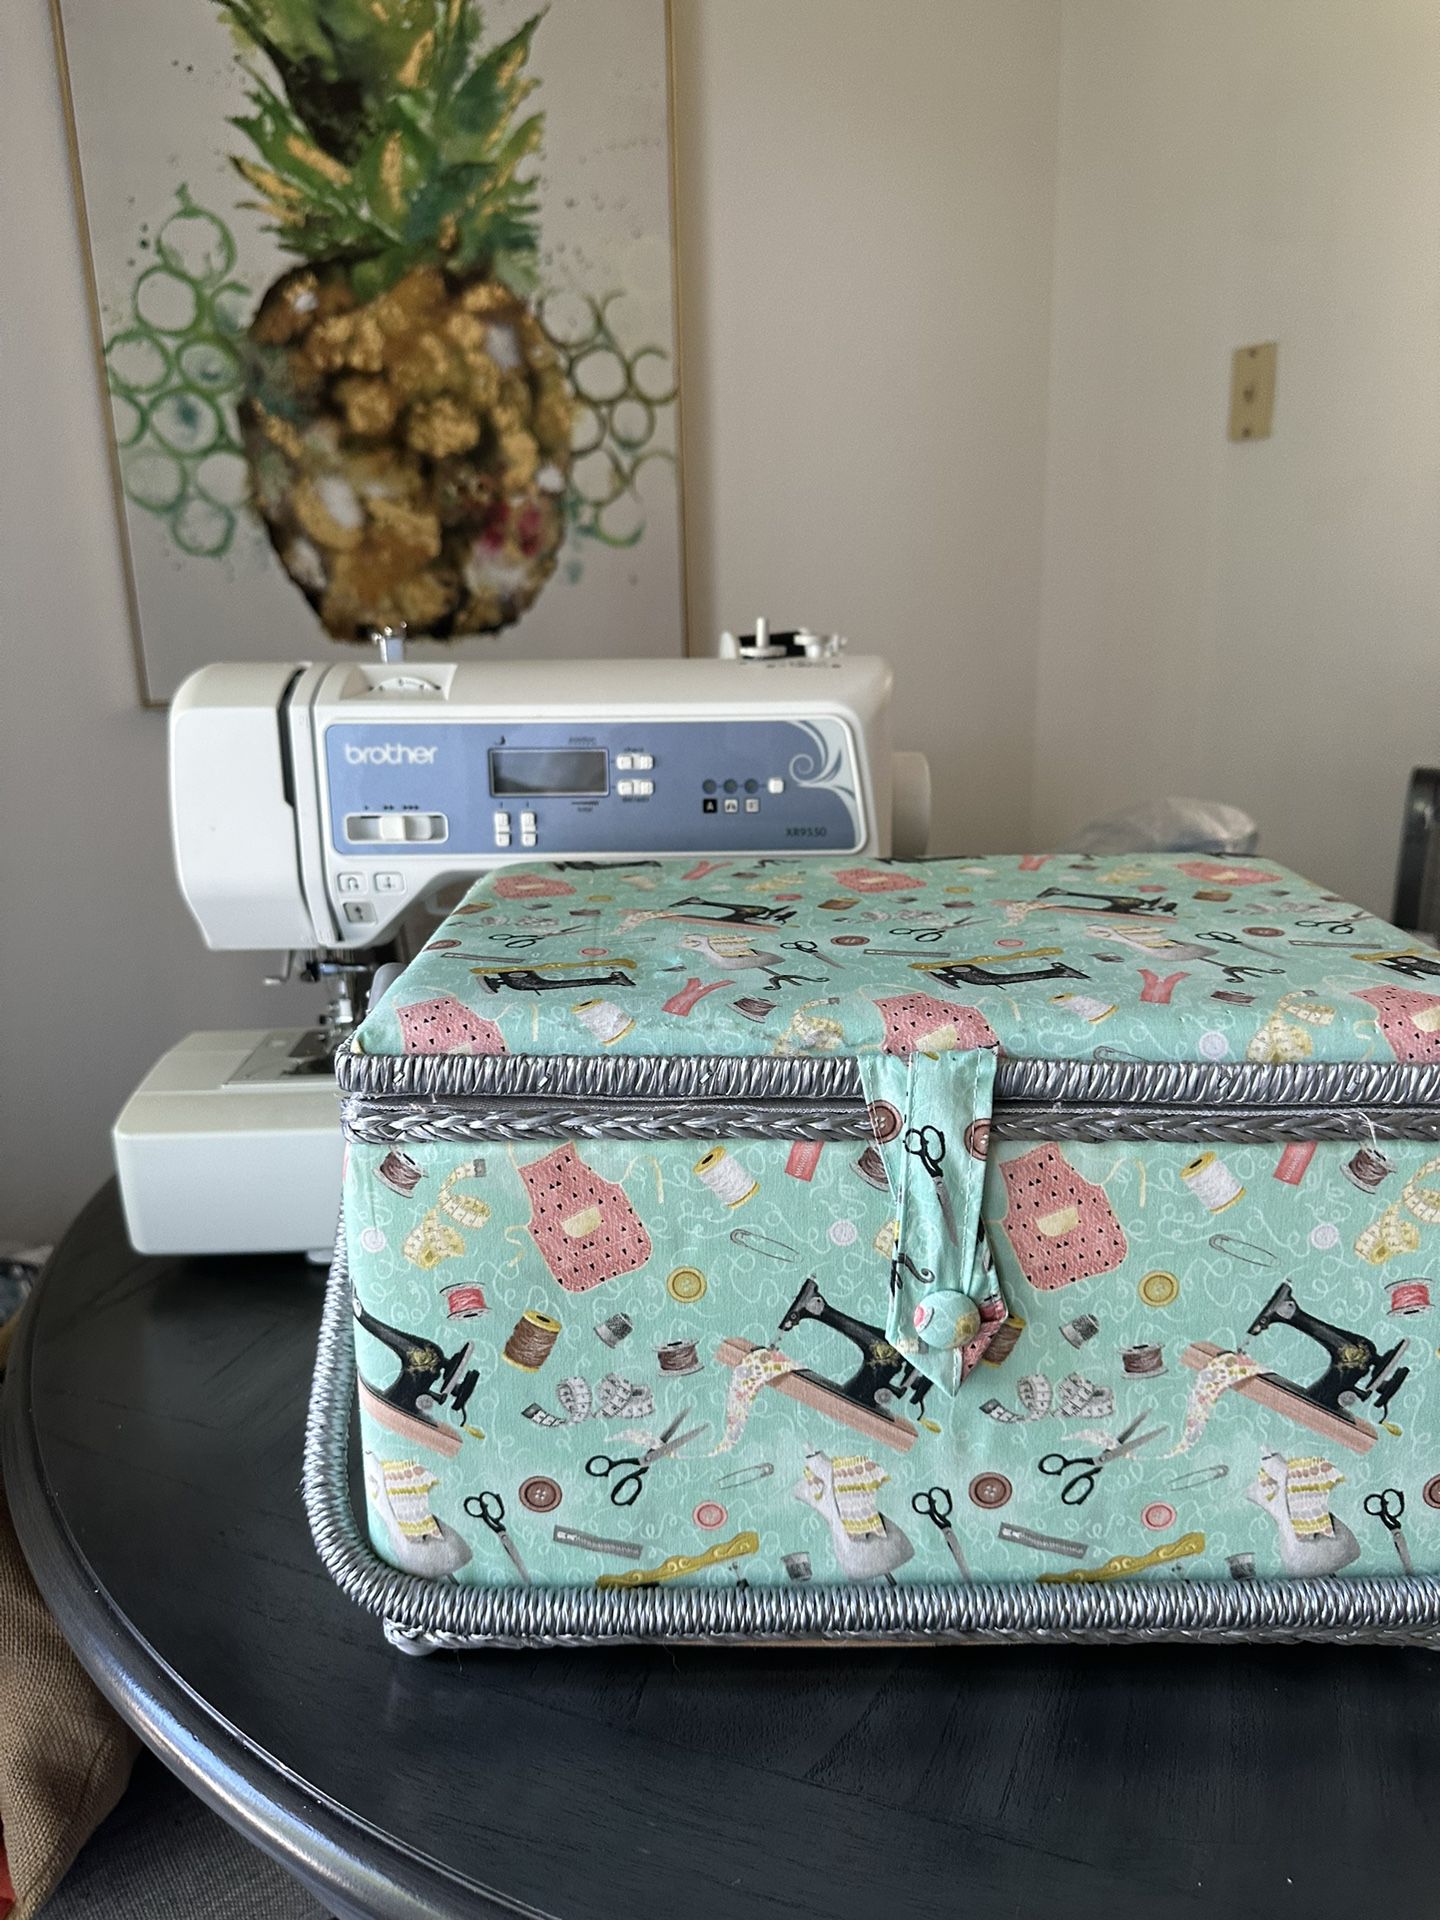 Brother Sewing Machine And More for Sale in Gig Harbor, WA - OfferUp